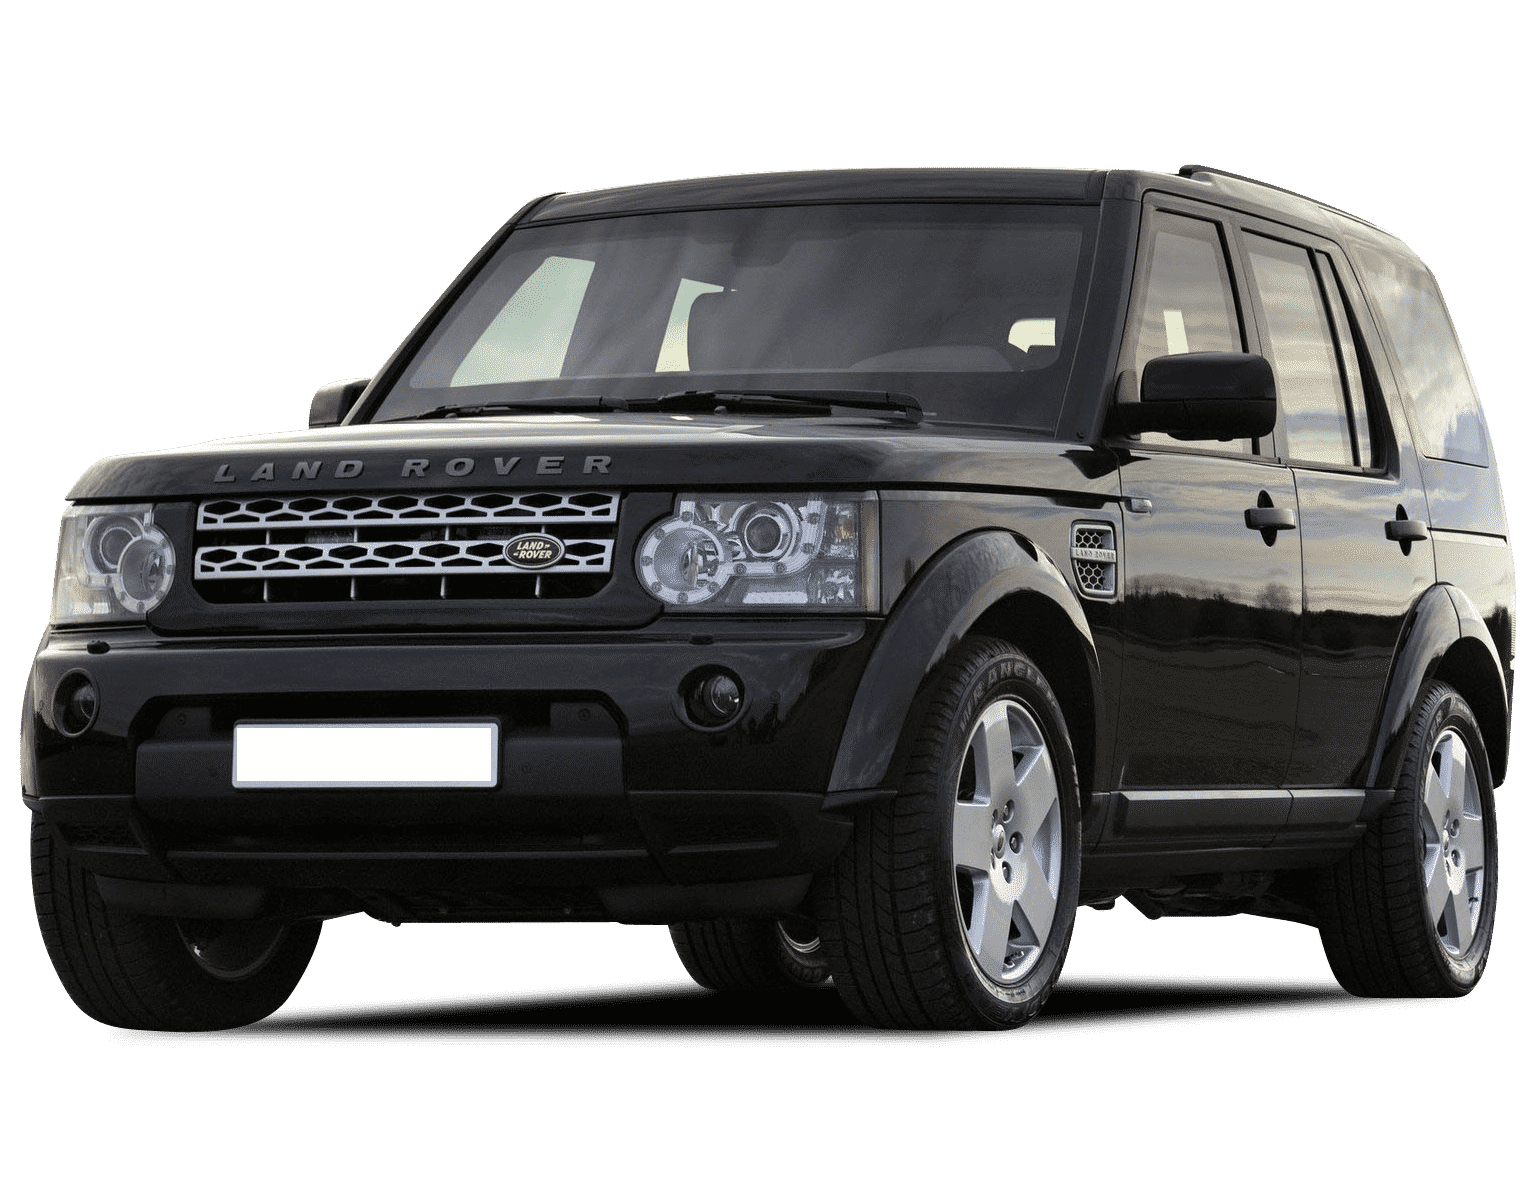 LAND ROVER DISCOVERY 4 HSE 3.0 V6 S/C ▶ Impuesto Vehicular ≫